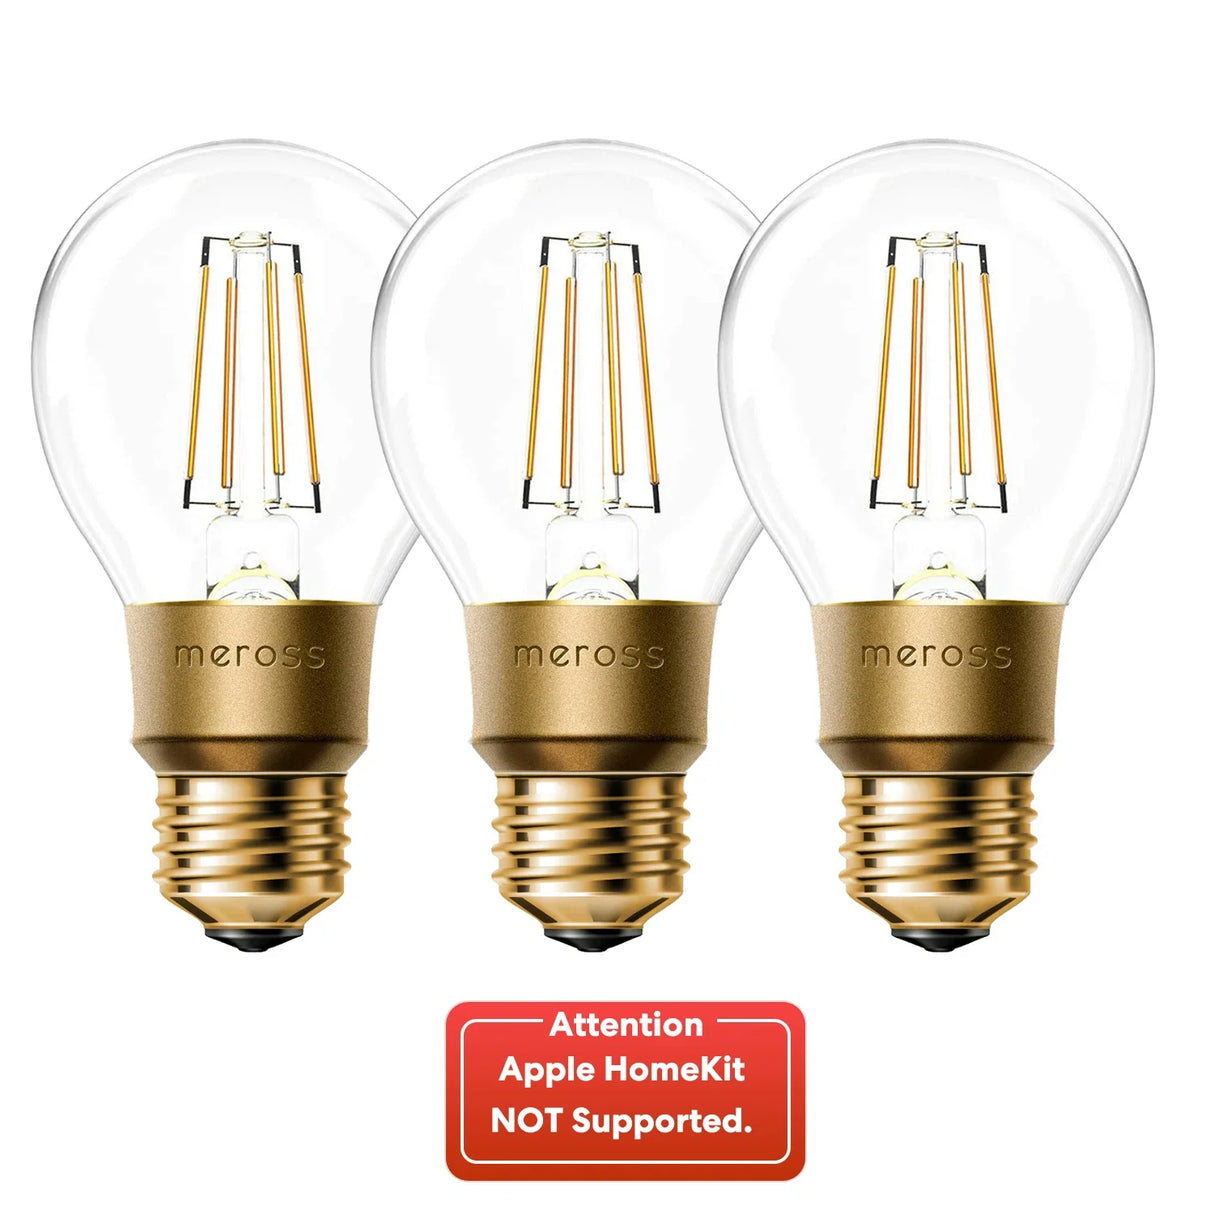 3 pack of led bulbs with gold finish